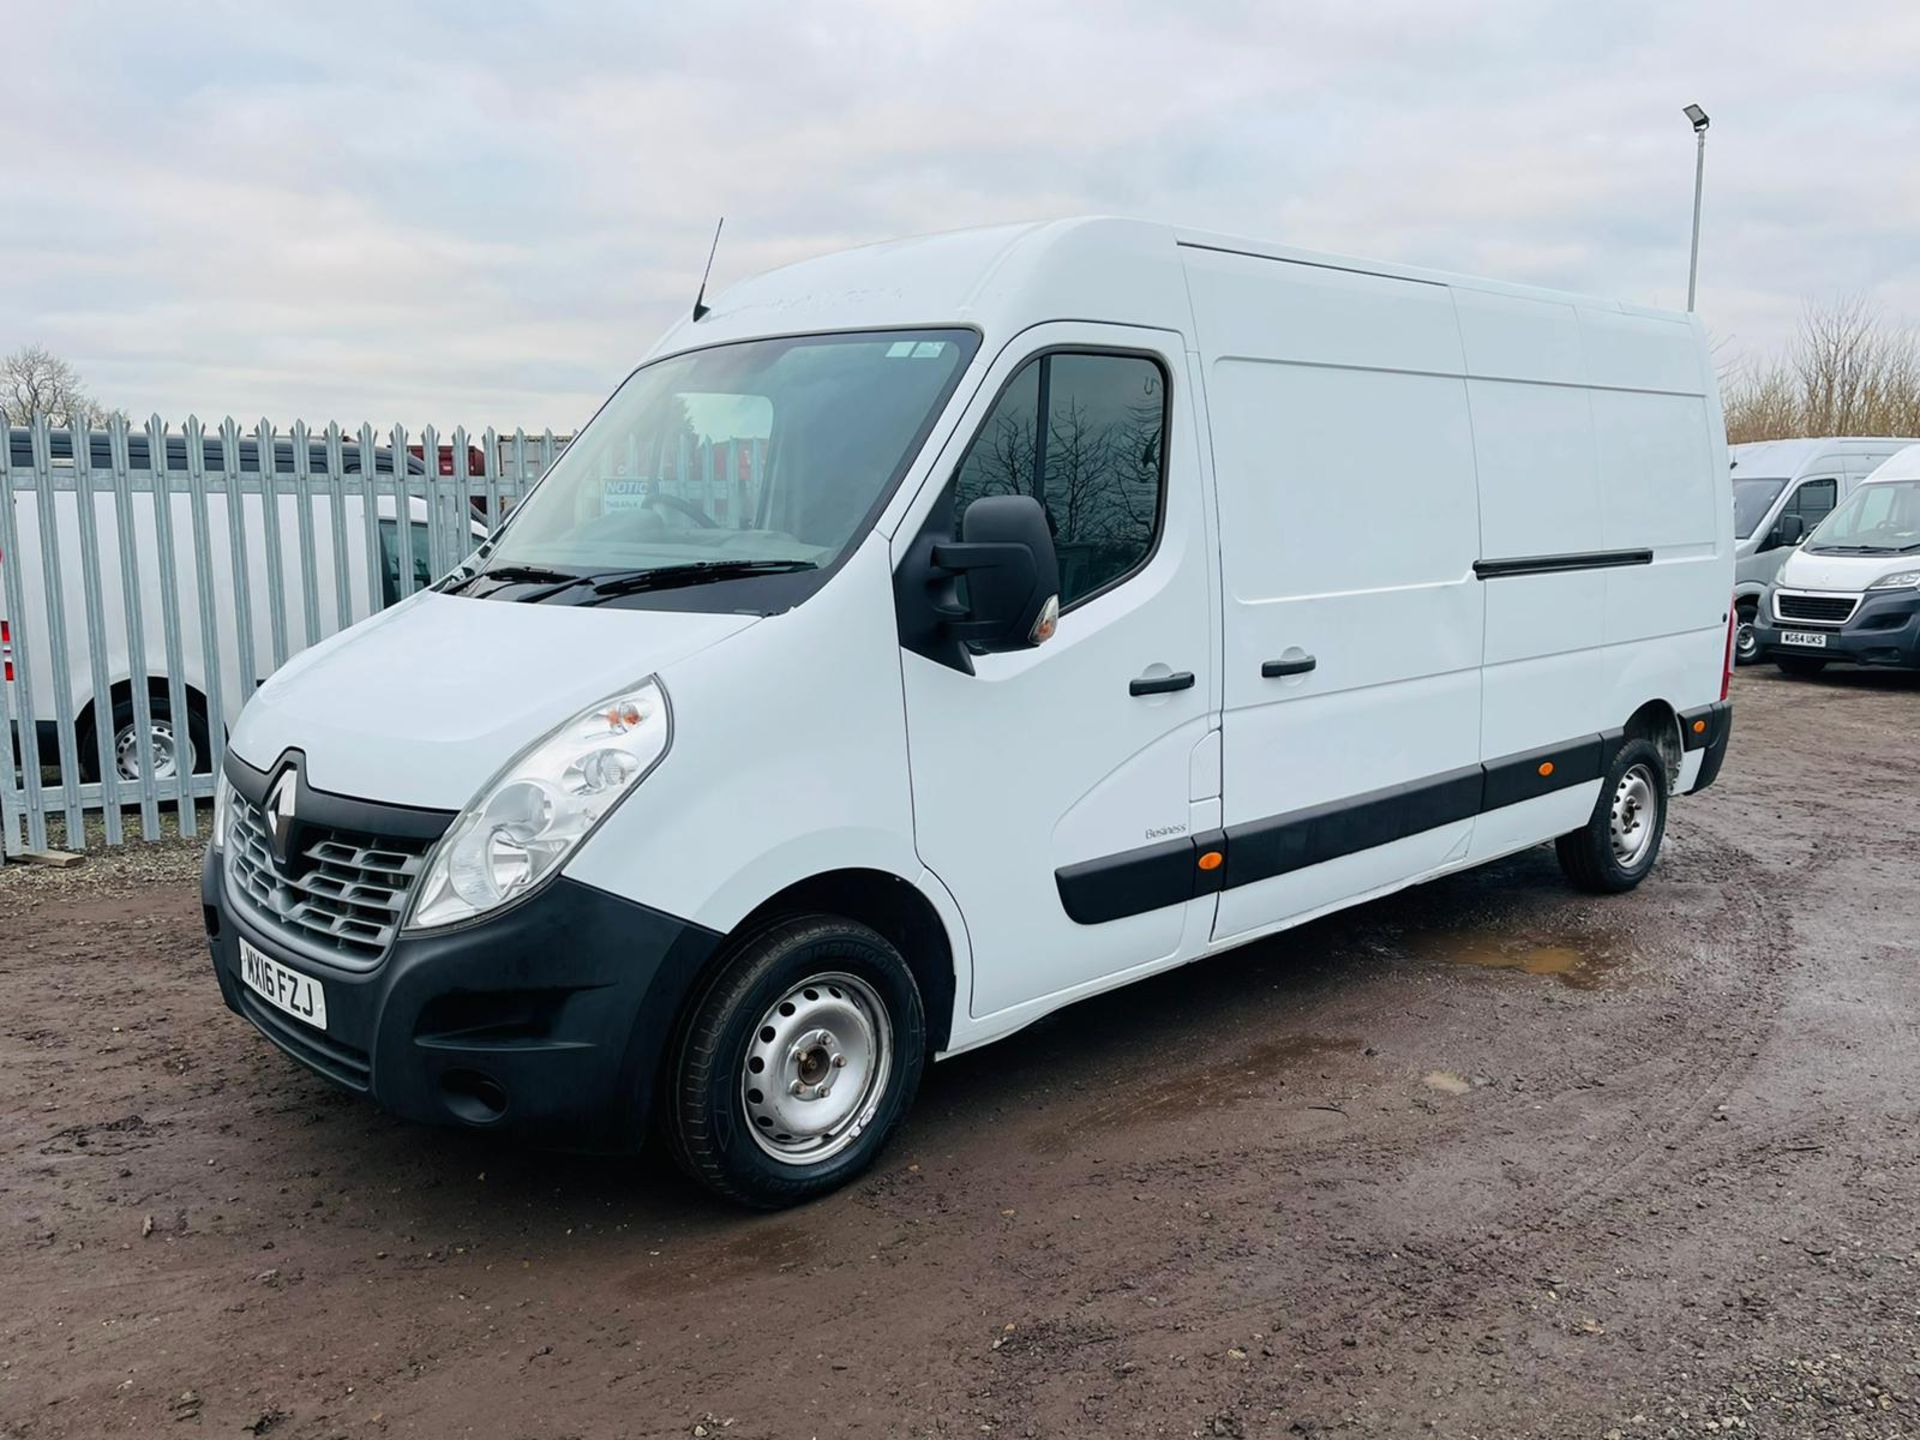 Renault Master 2.3 DCI 110 Business LM35 L3 H2 2016 '16 reg' Fridge/Freezer - Fully Insulated - Image 6 of 23